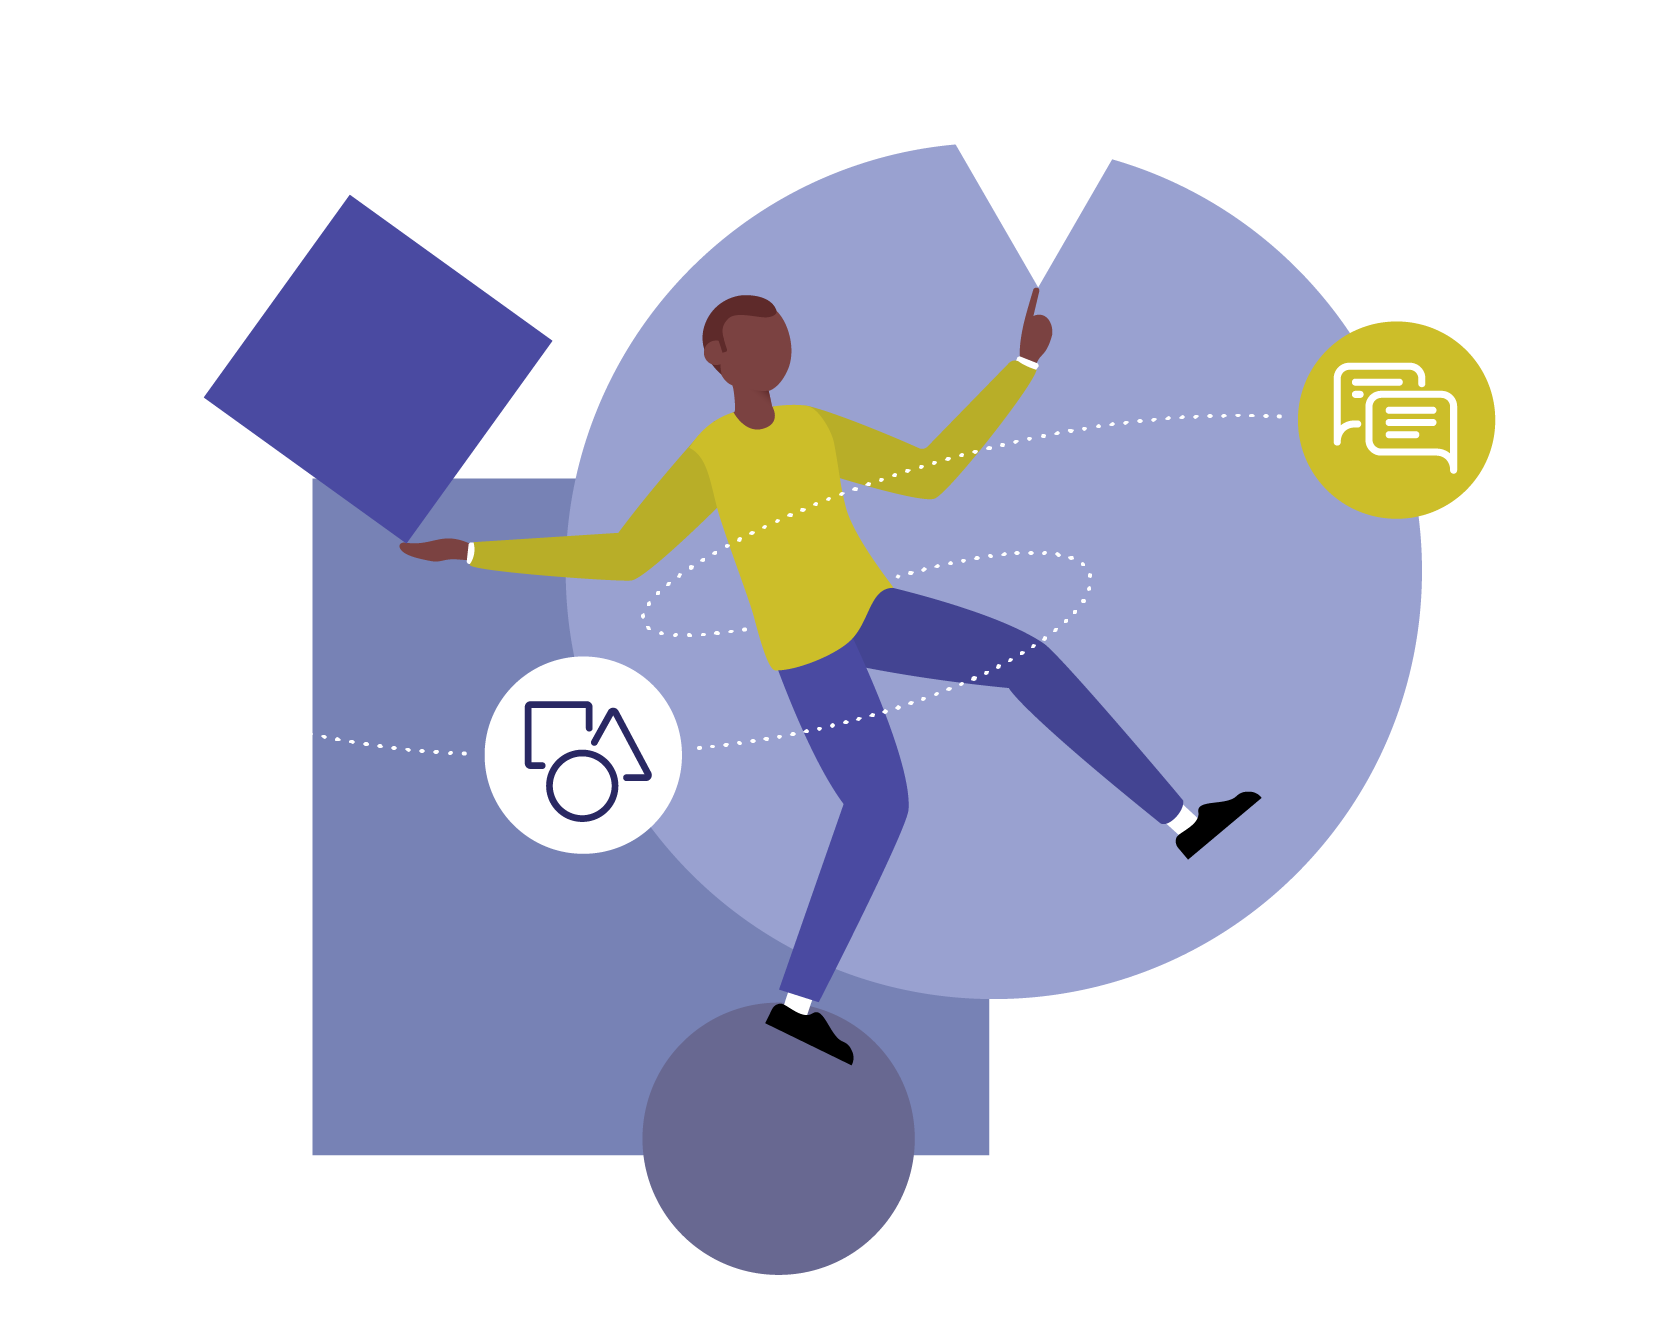 An illustration depicting a person balancing on a circle and juggling a square and triangle (the collective symbols of creative services) to convey brand communications services